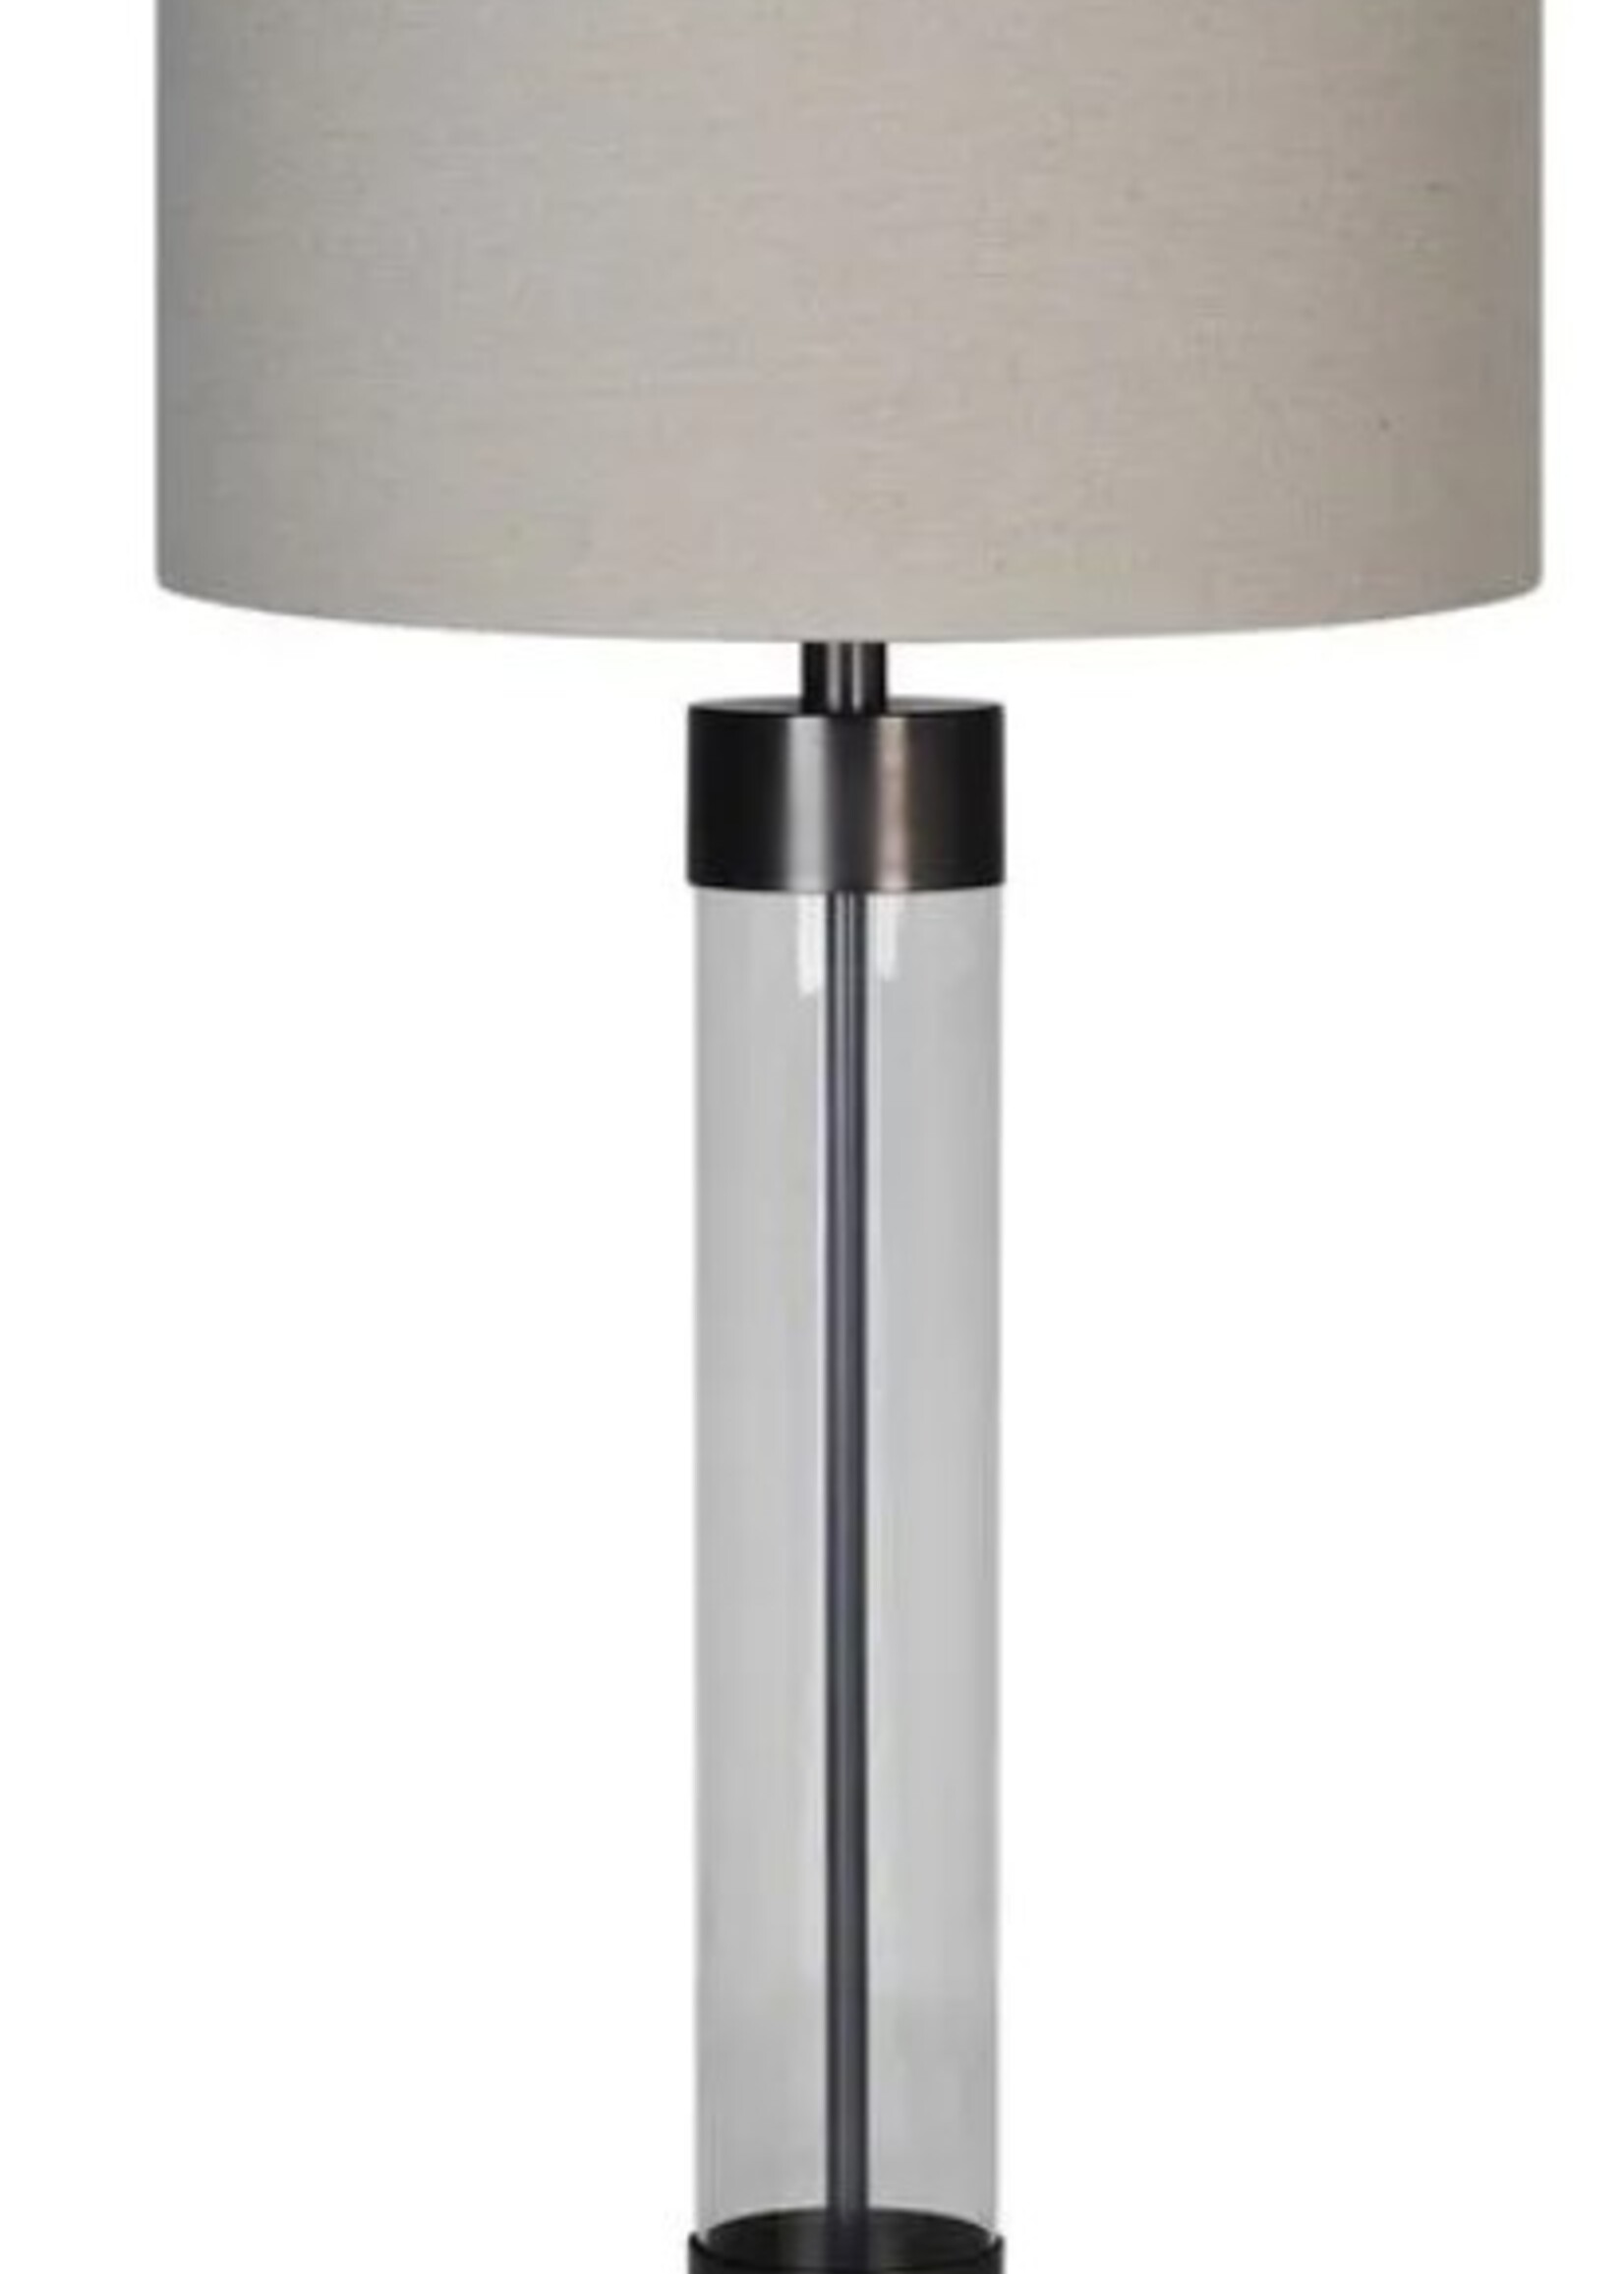 Renwil Meredith Table Lamp